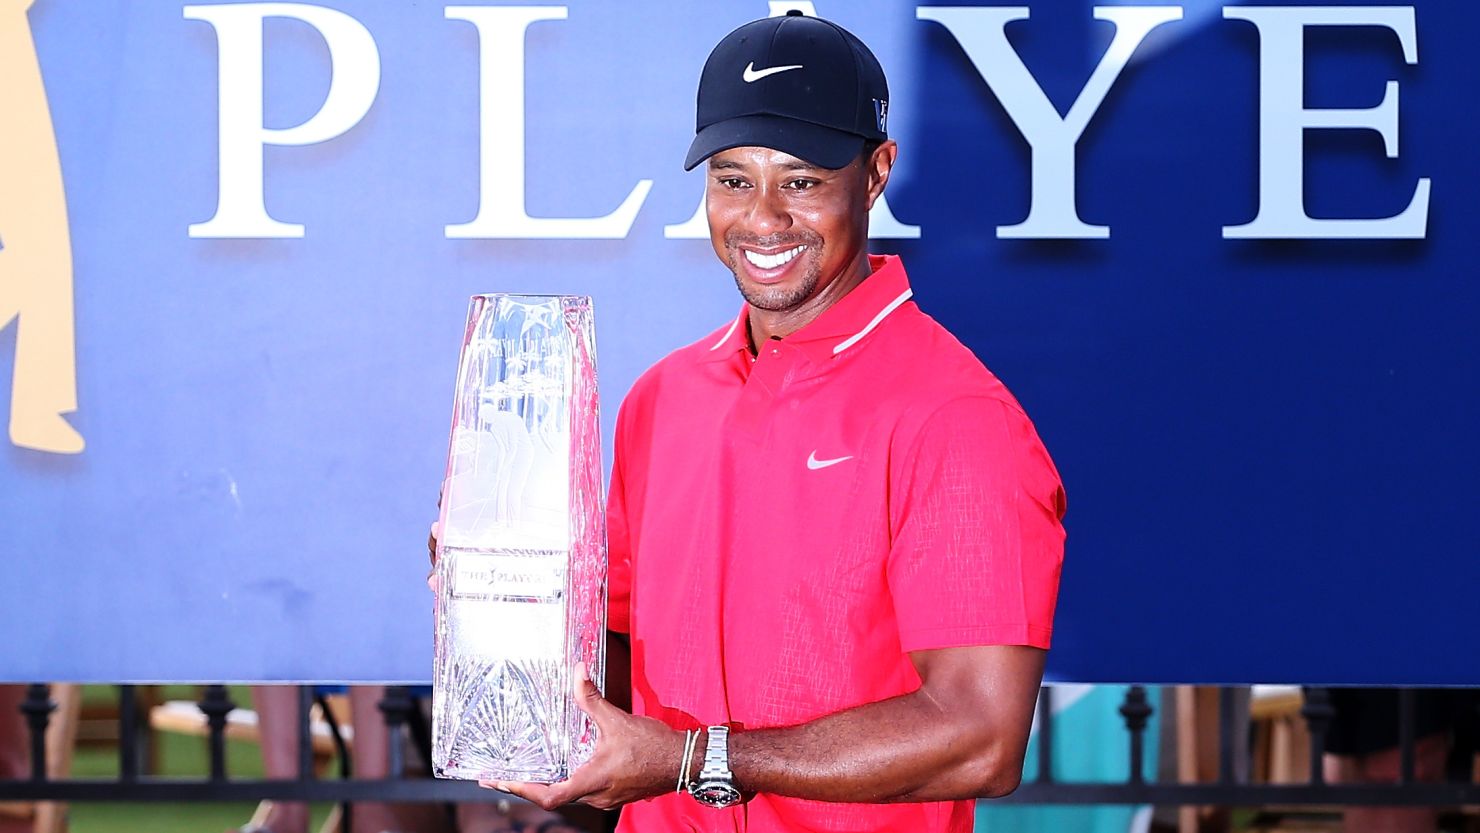 World No. 1 Tiger Woods won the Players Championship for the first time since 2001.